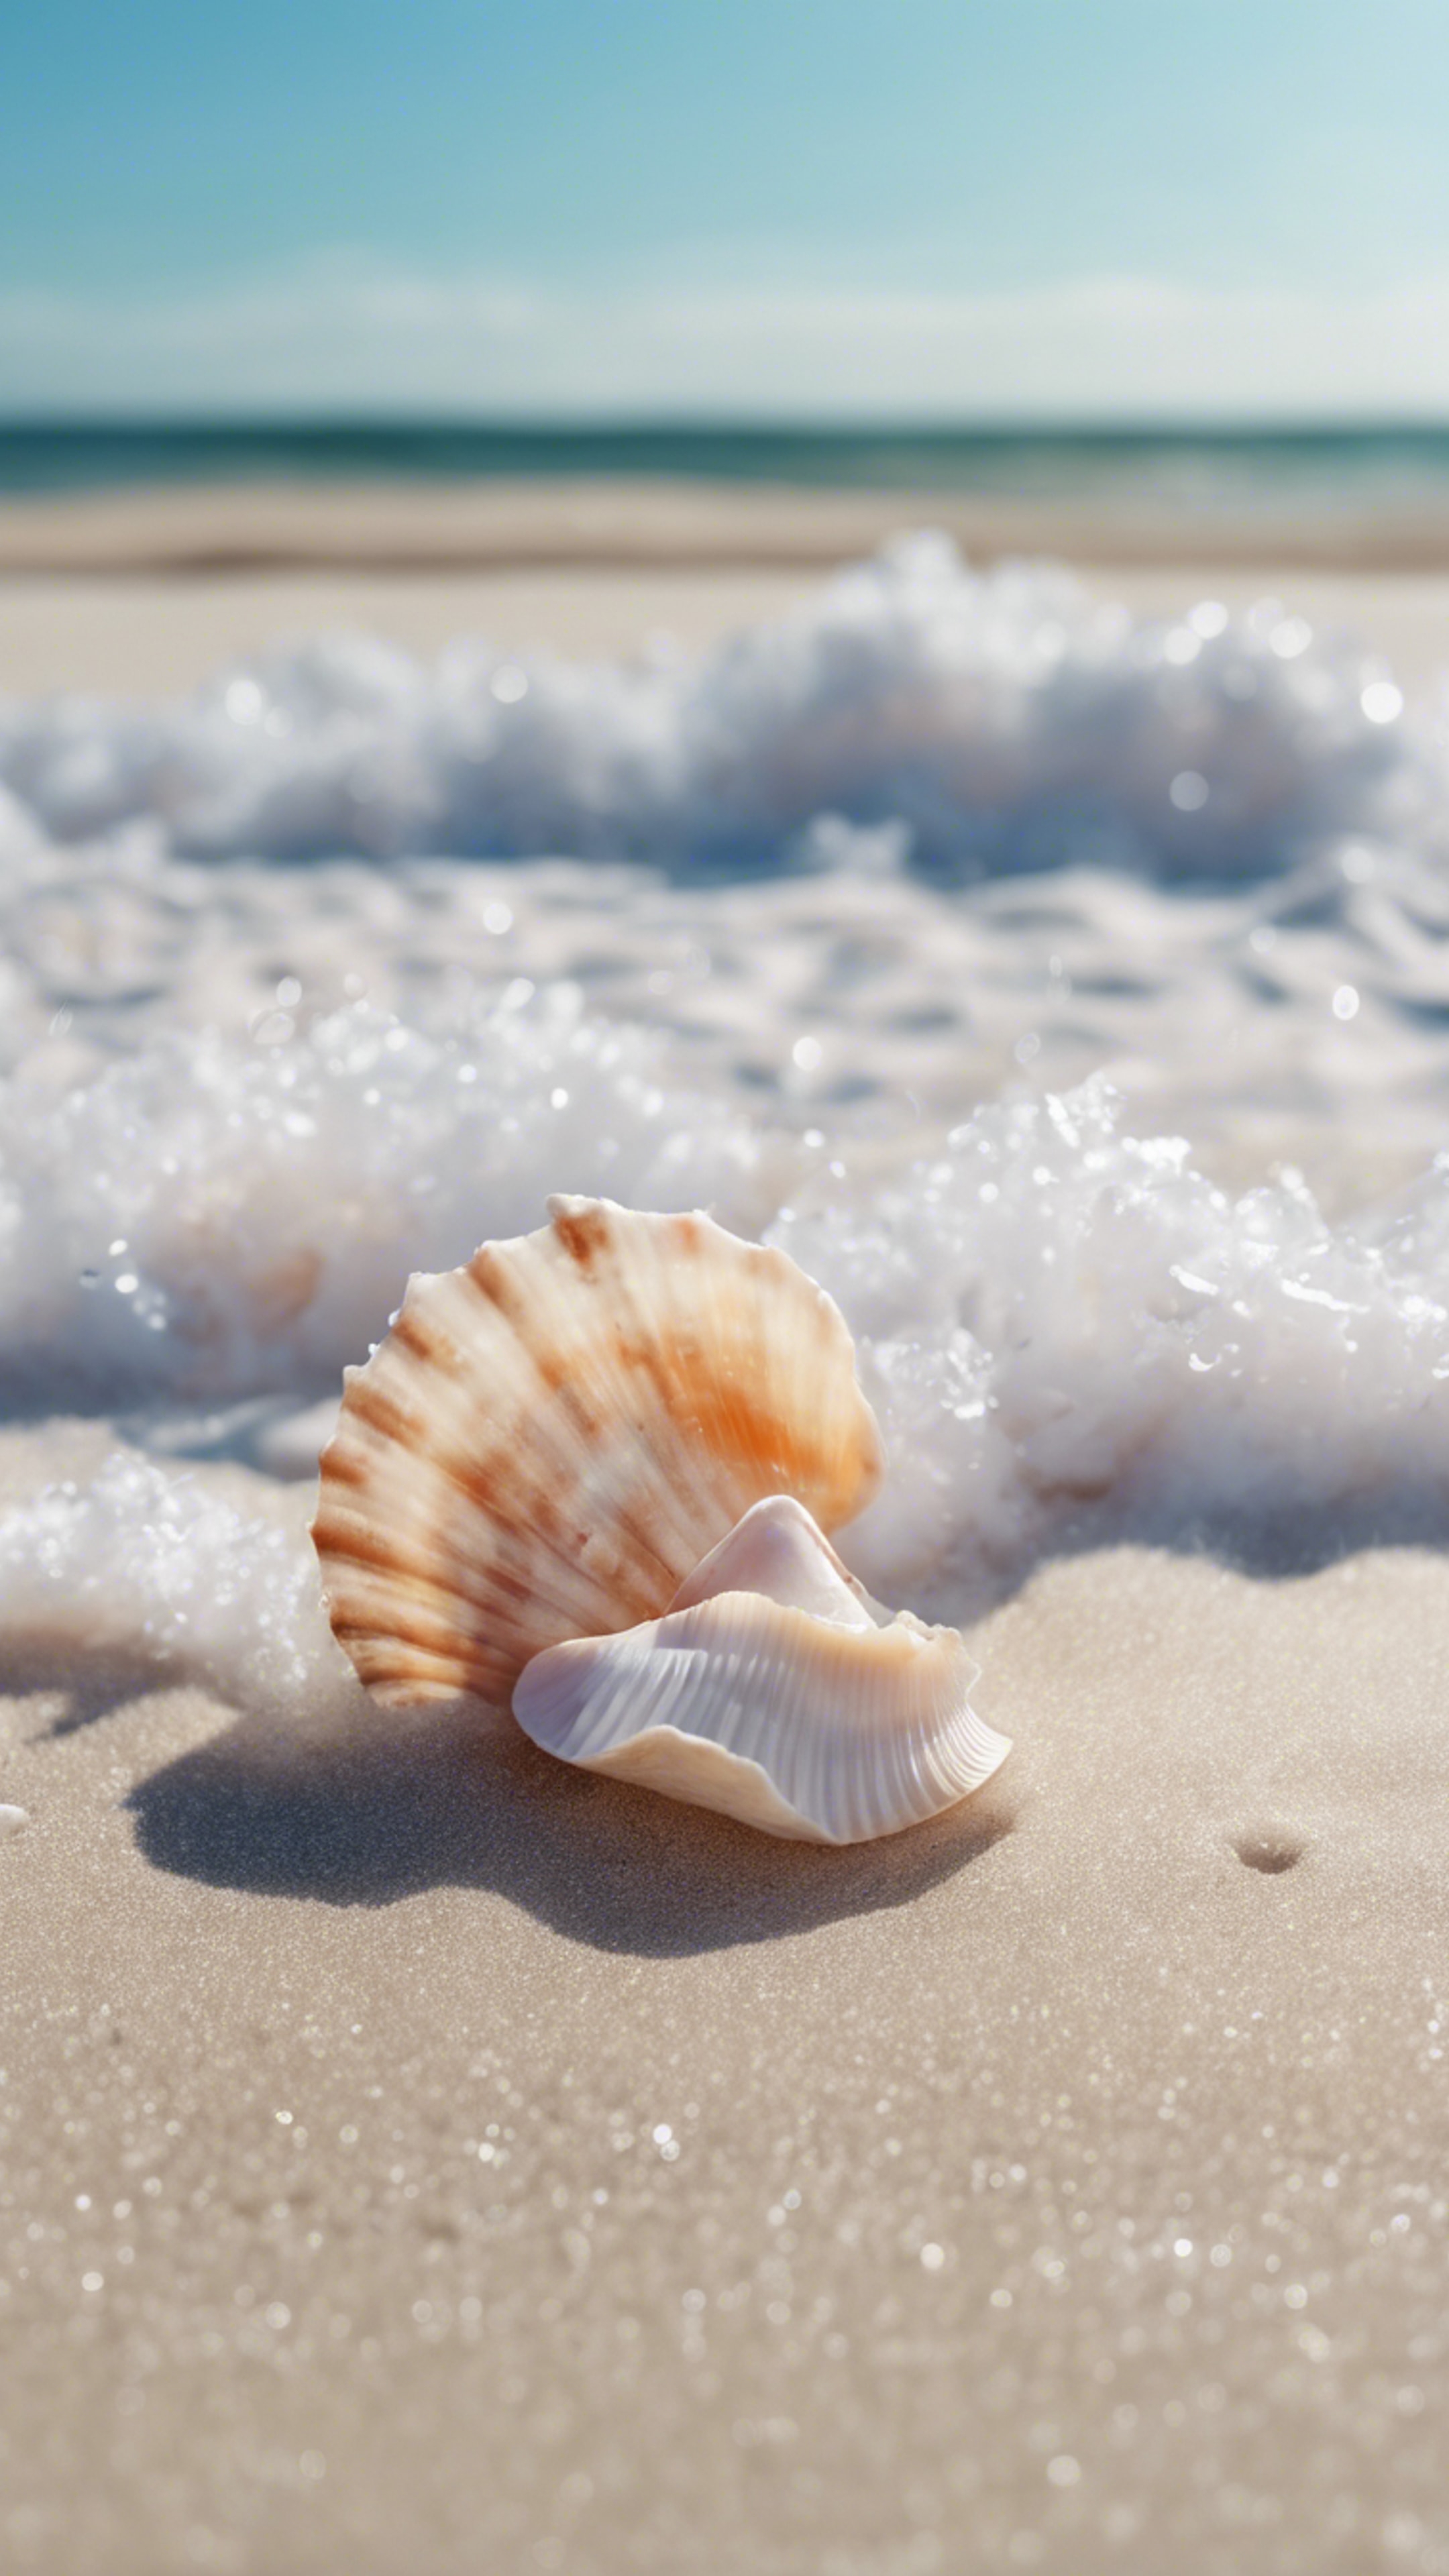 A wave washing ashore under a pastel blue sky, seashells scattered in white sand. Шпалери[00bc1dd8280e4c80977e]